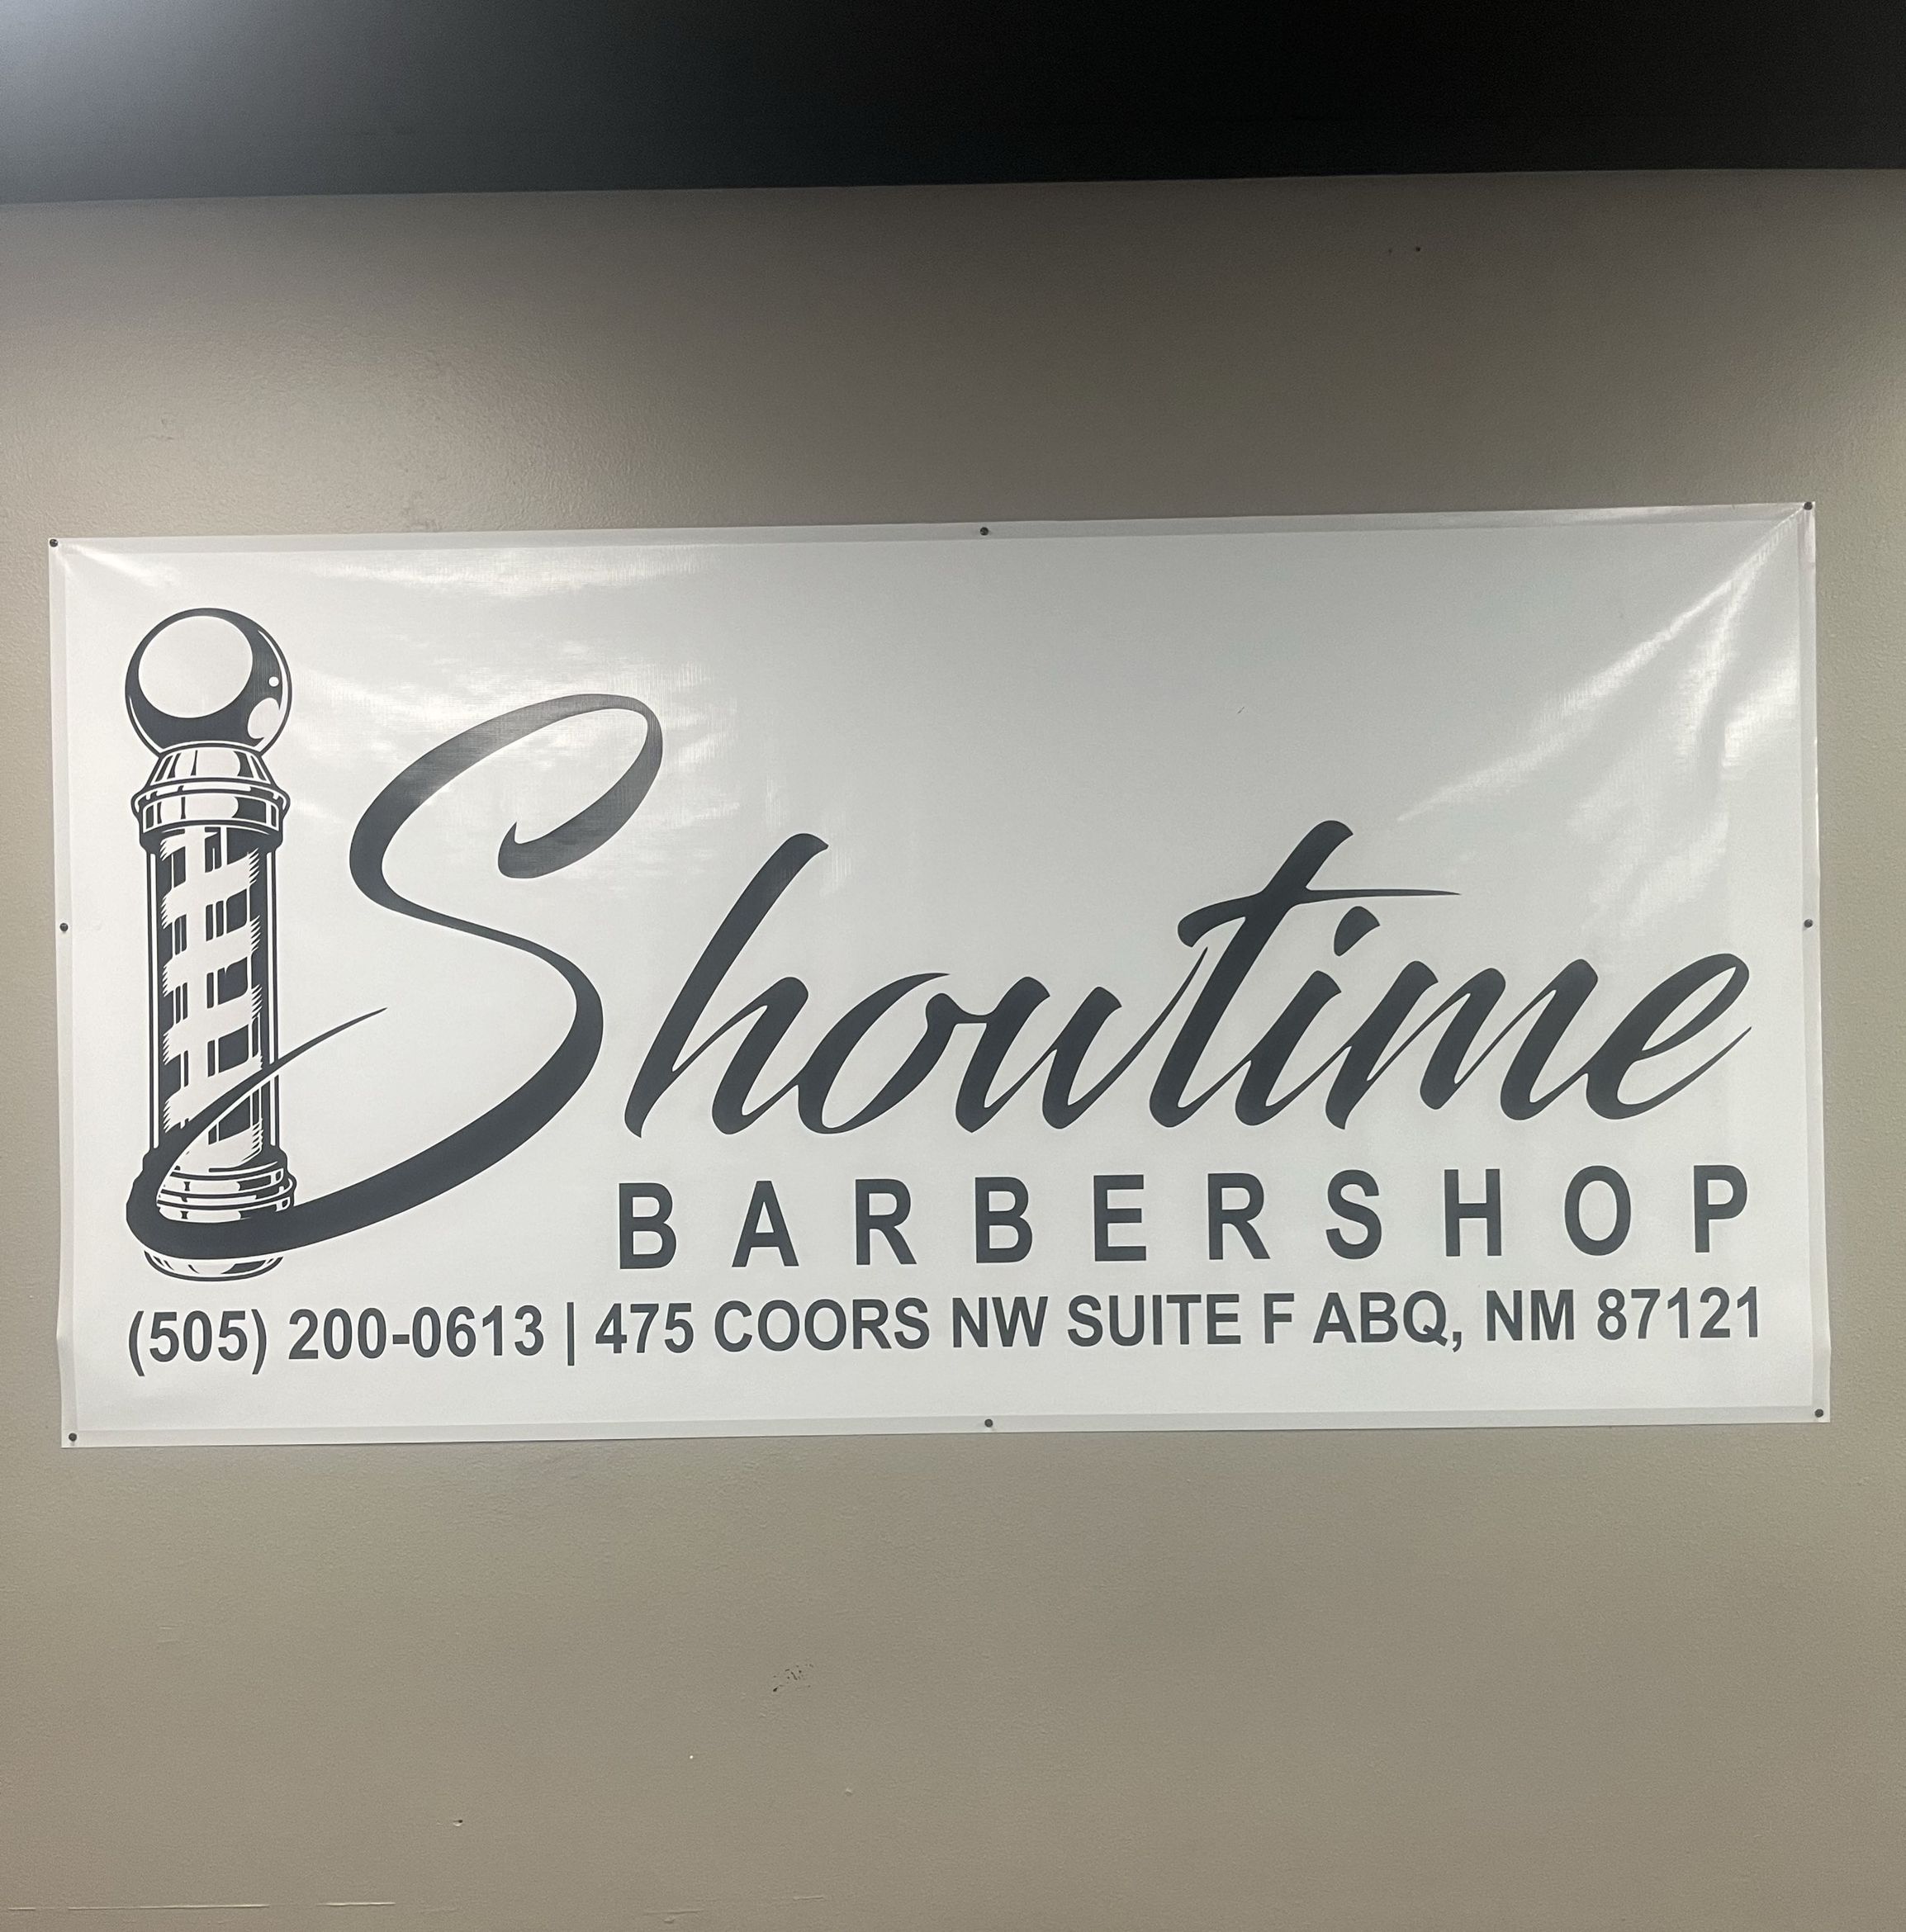 Showtime Barbershop, 475 Coors Blvd NW Ste F, F, Albuquerque, 87121